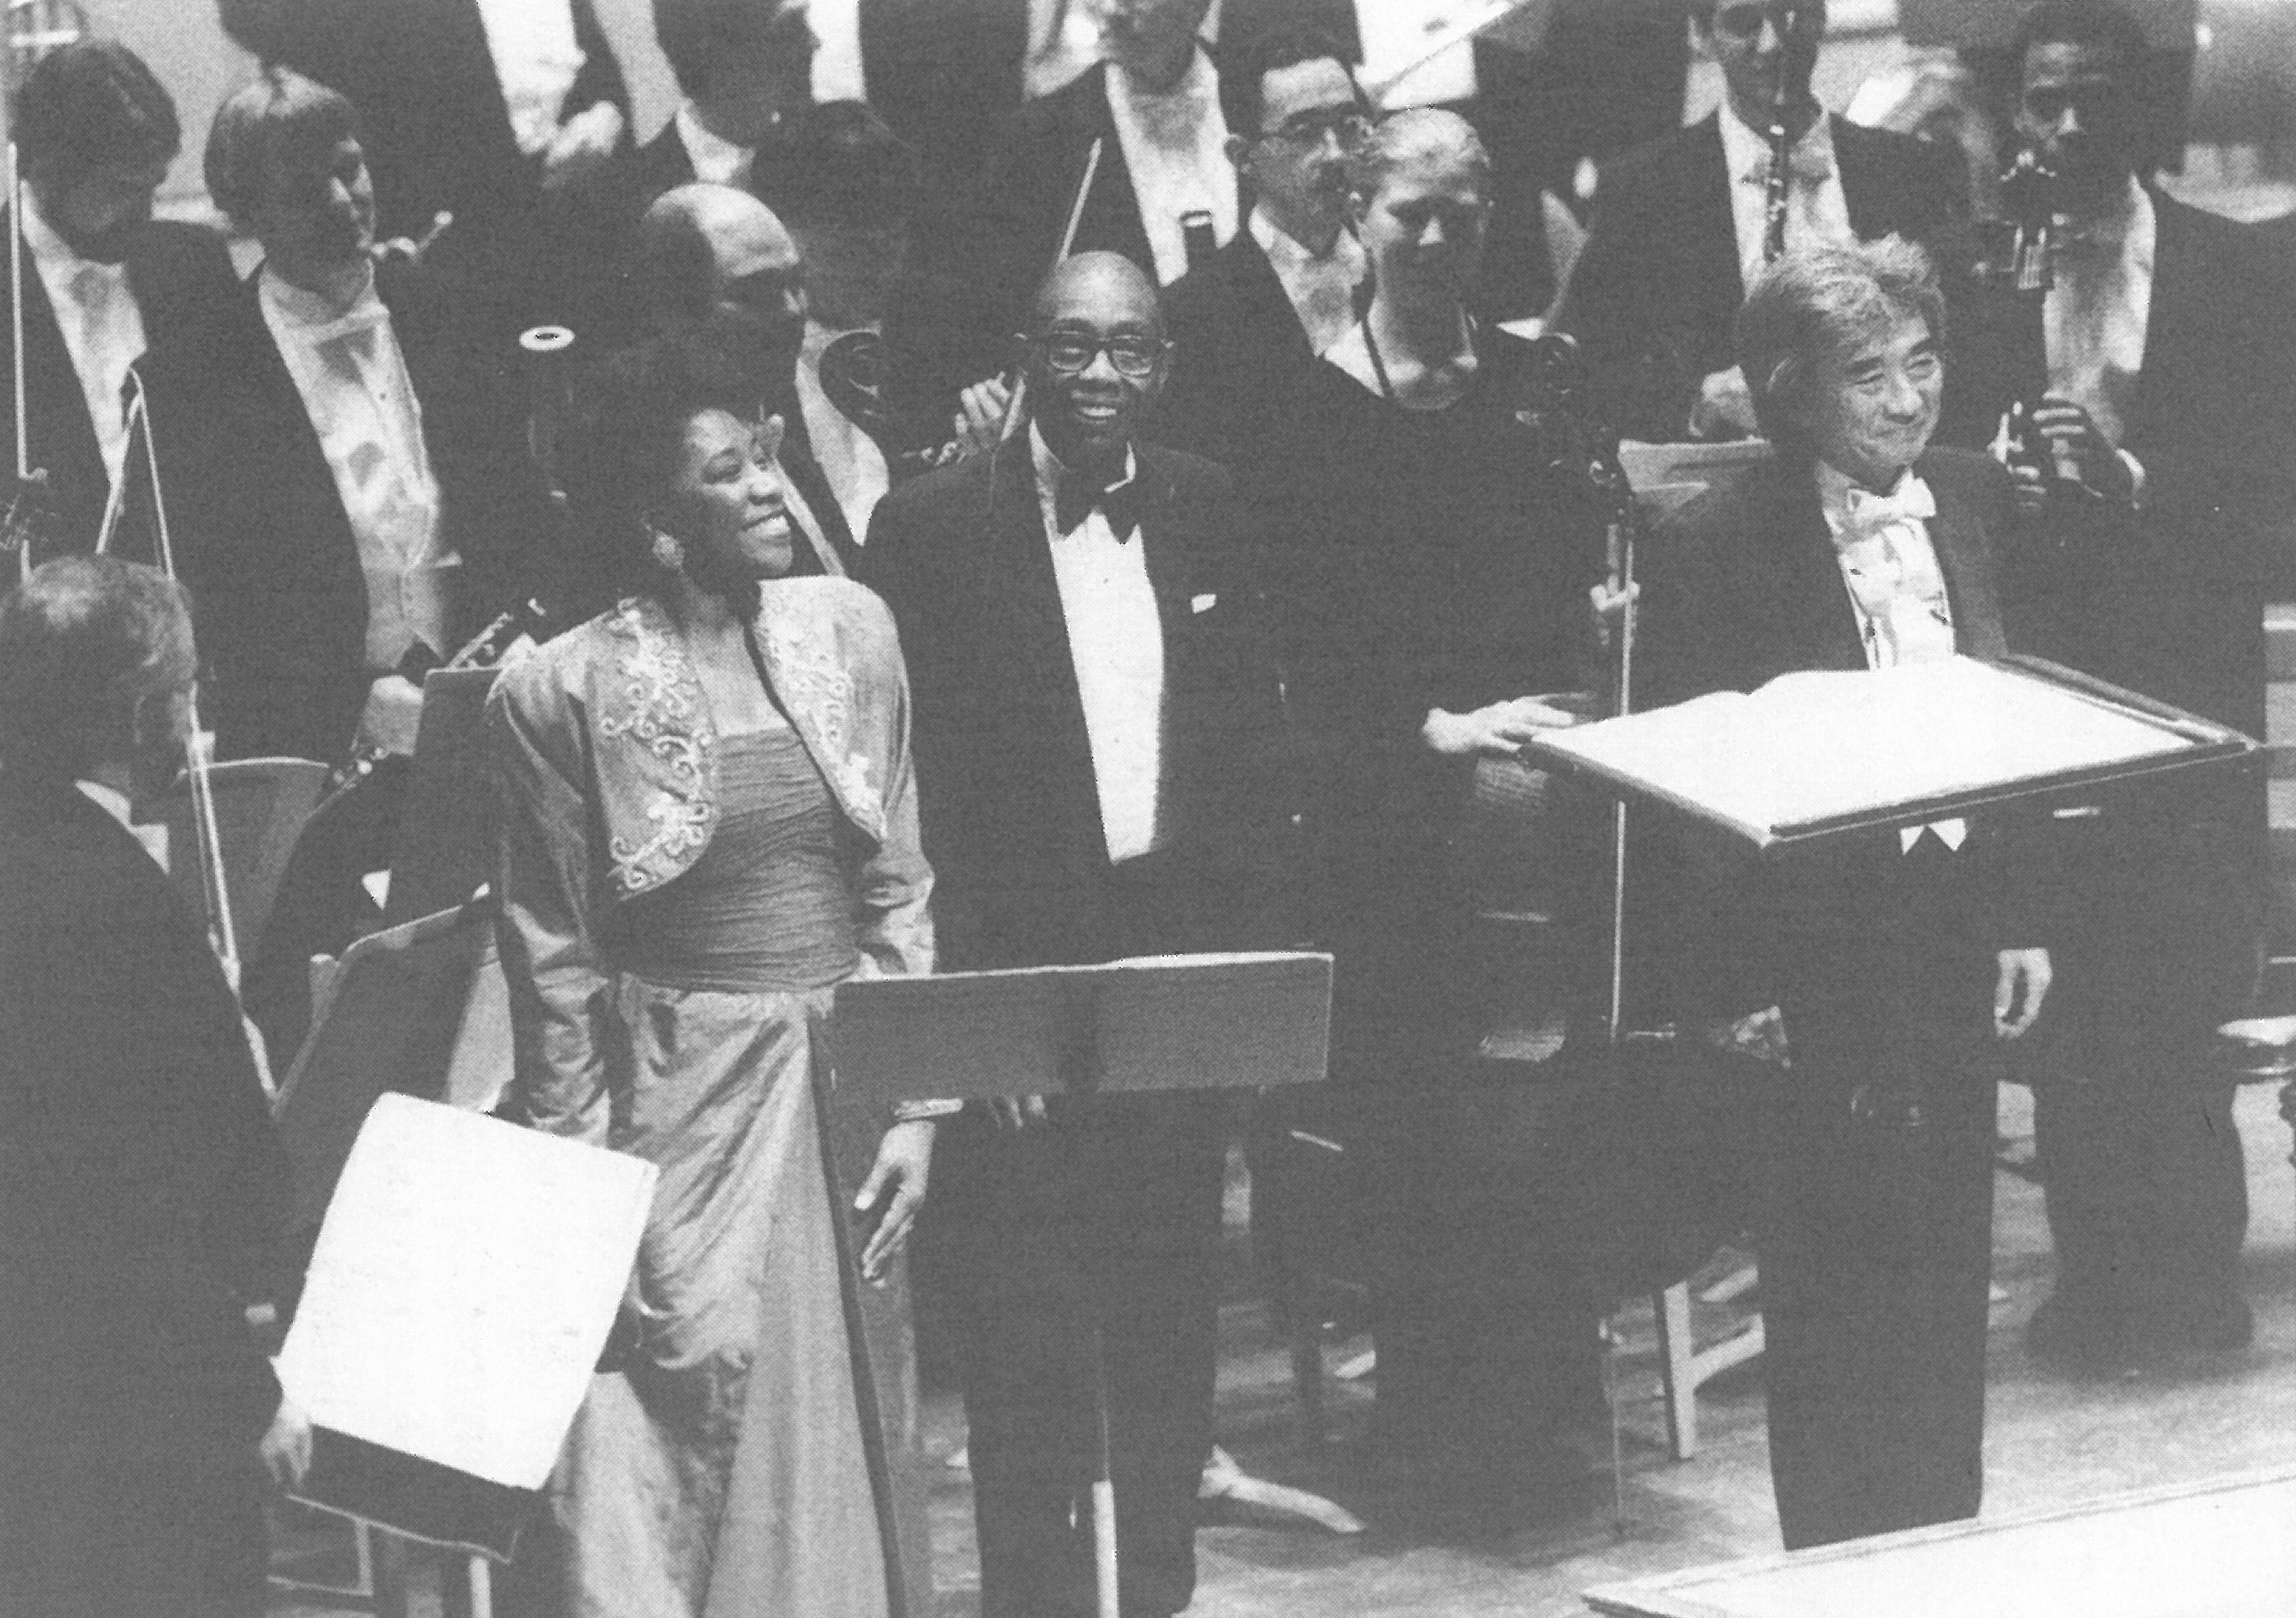 Historic photo of soprano Faye Robinson, George Walker, and conductor Seiji Ozawa with the Boston Symphony Orchestra on the stage of Orchestra Hall in Boston in 1996.